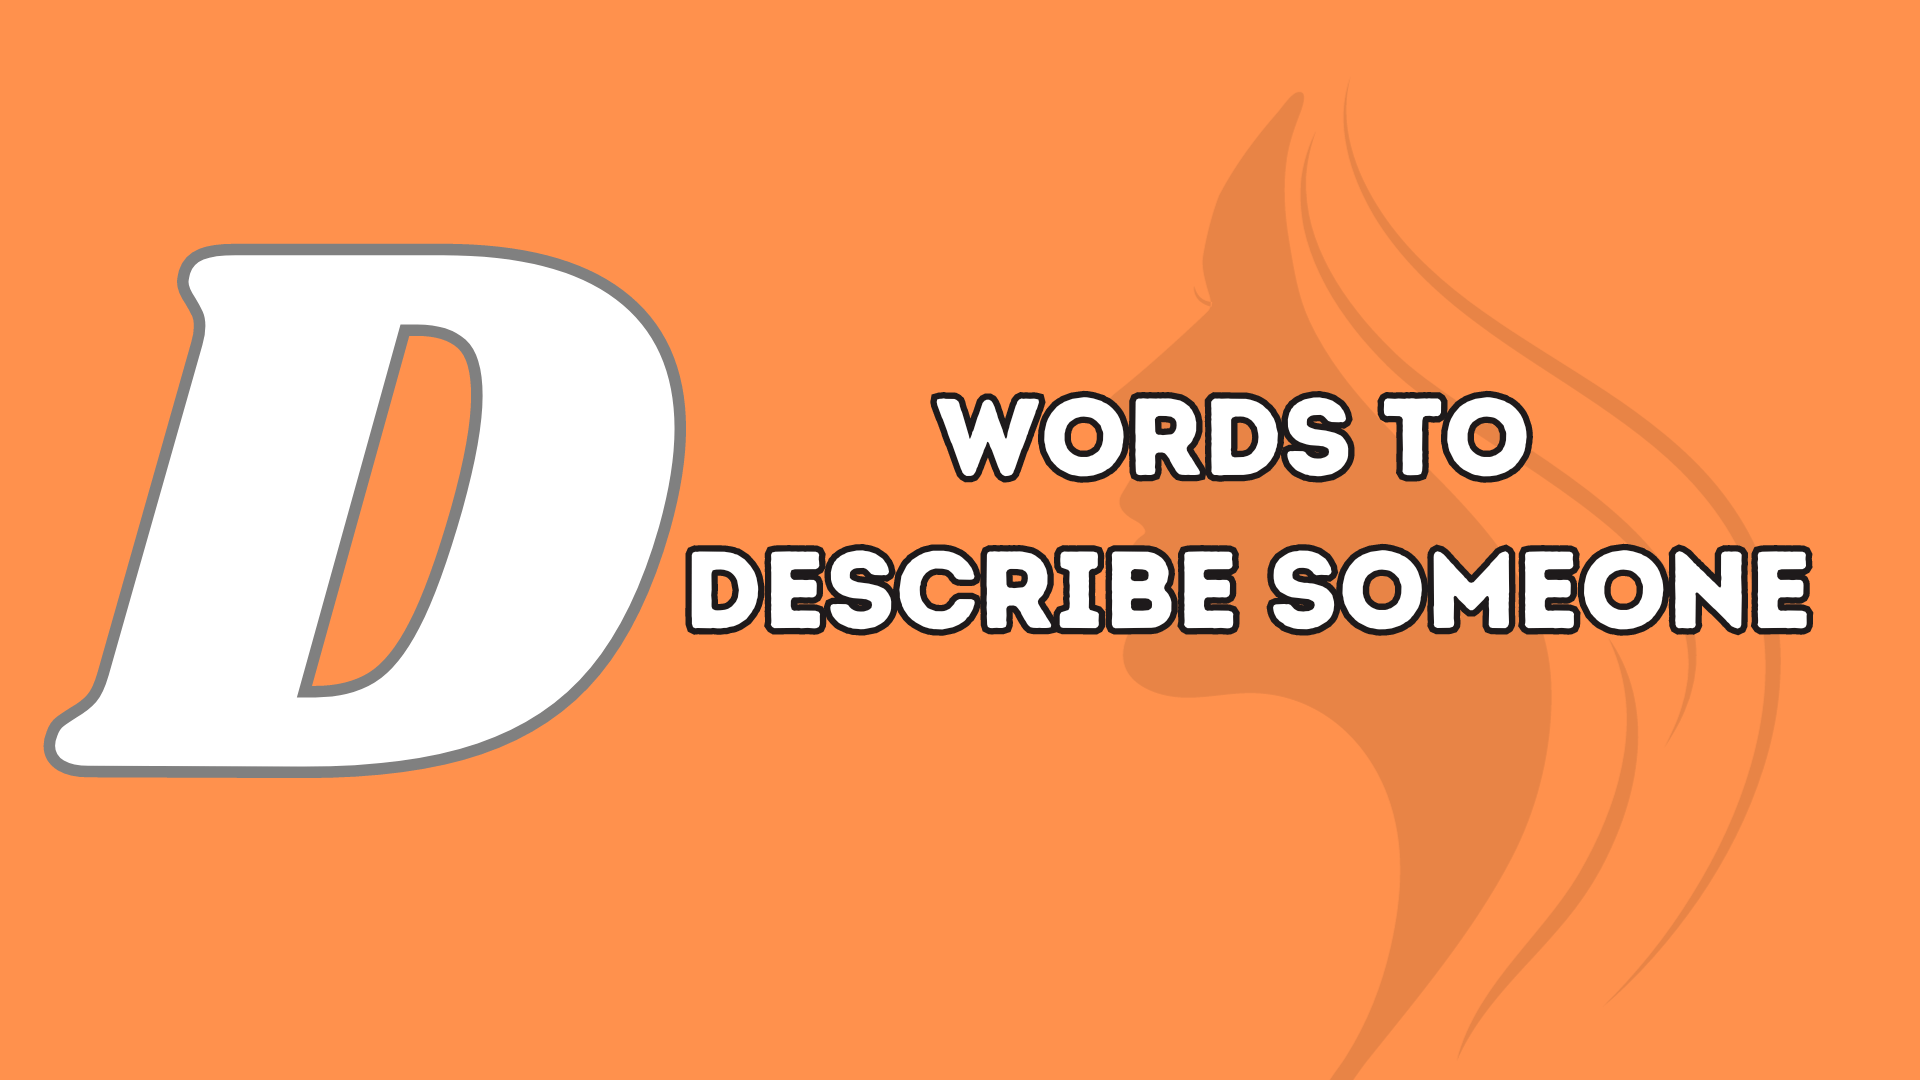 ‘D’ Words To Describe Someone